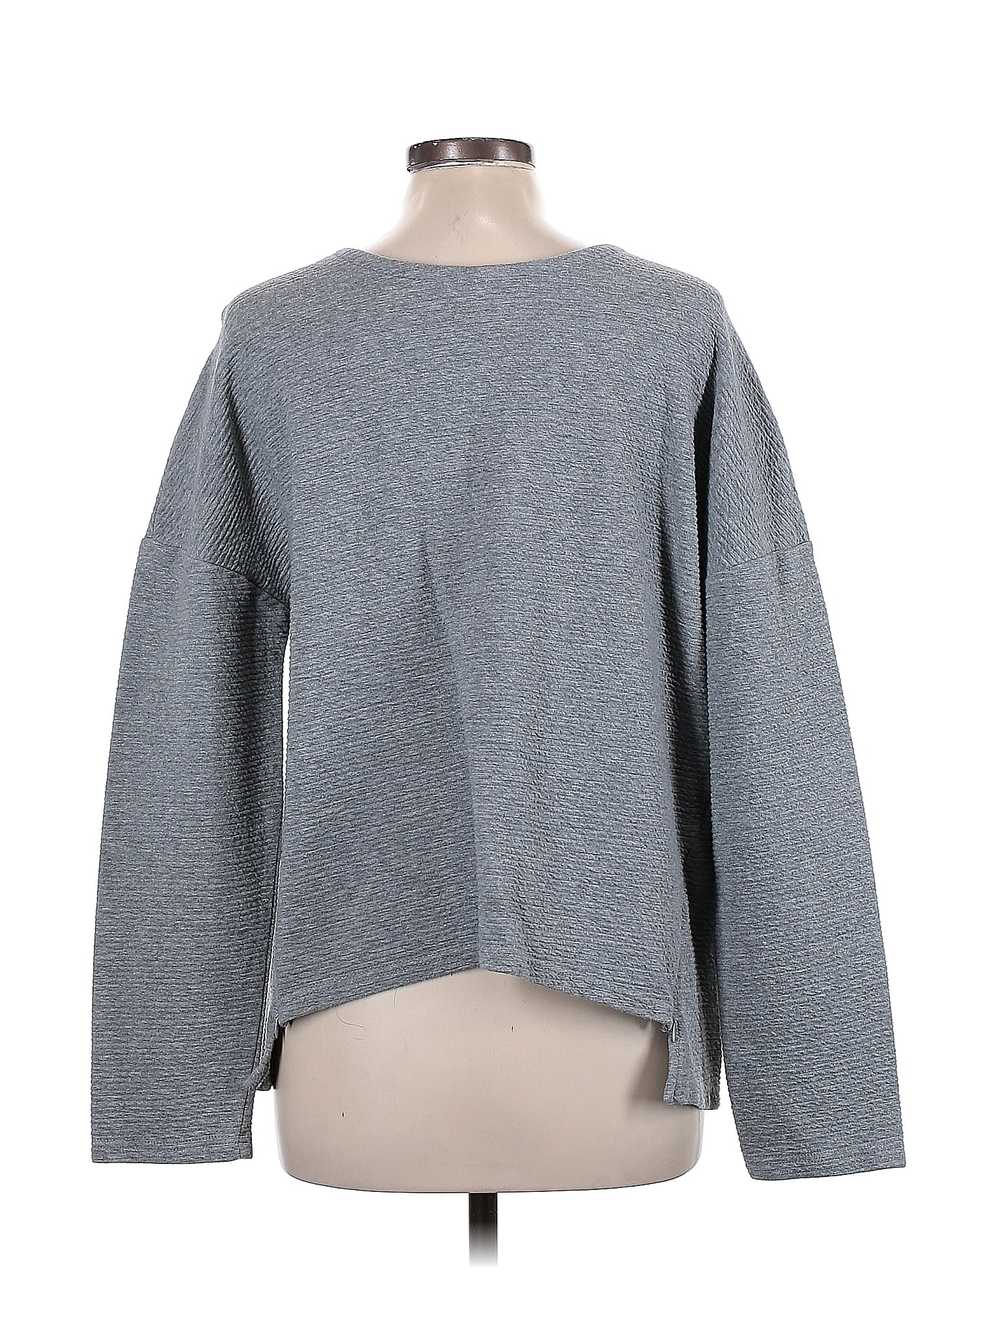 Athletic Works Women Gray Pullover Sweater L - image 2